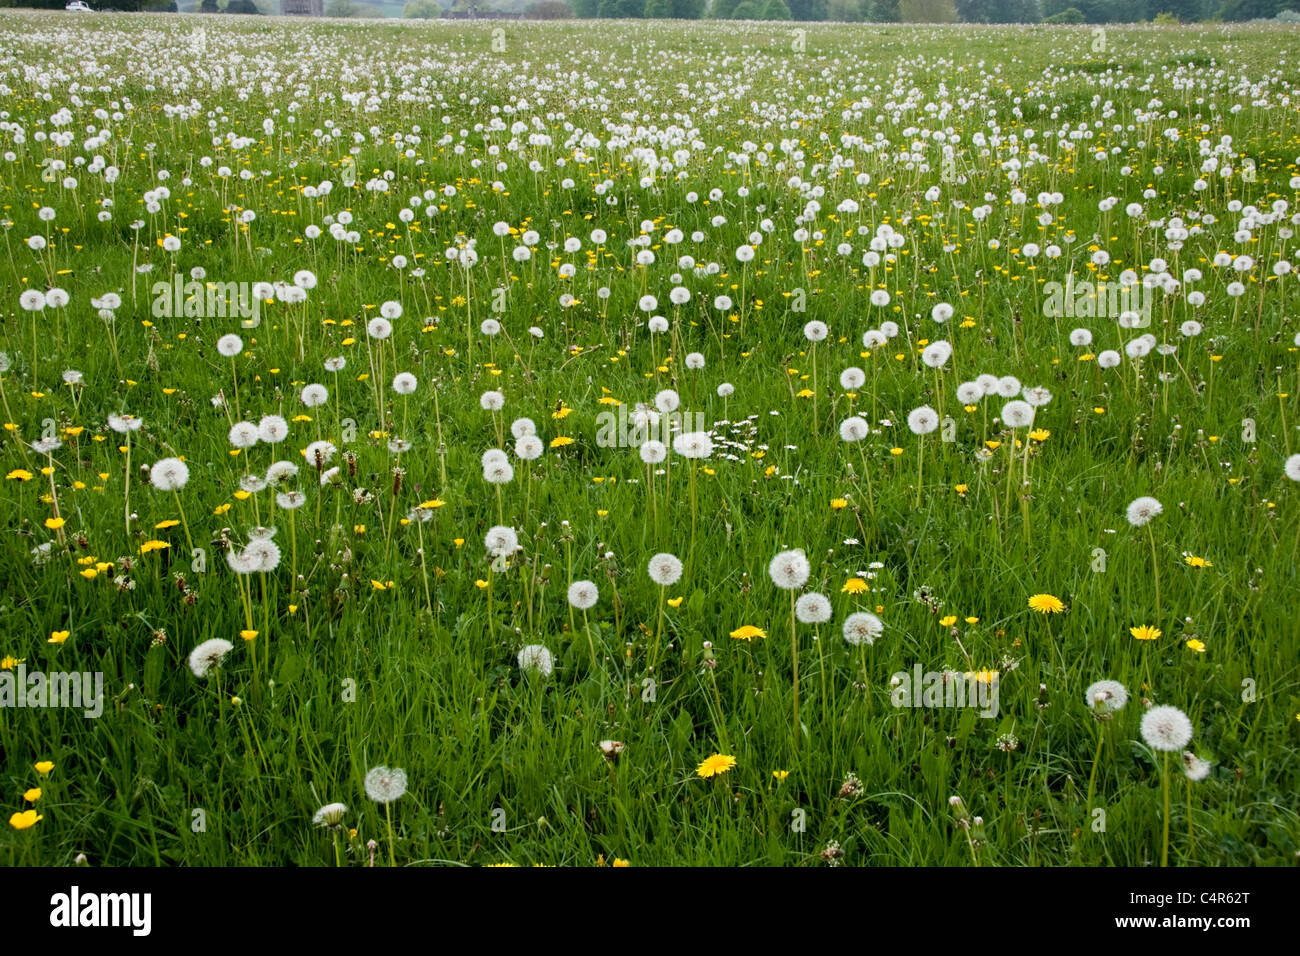 An English meadow in spring with dandelion clocks Stock Photo